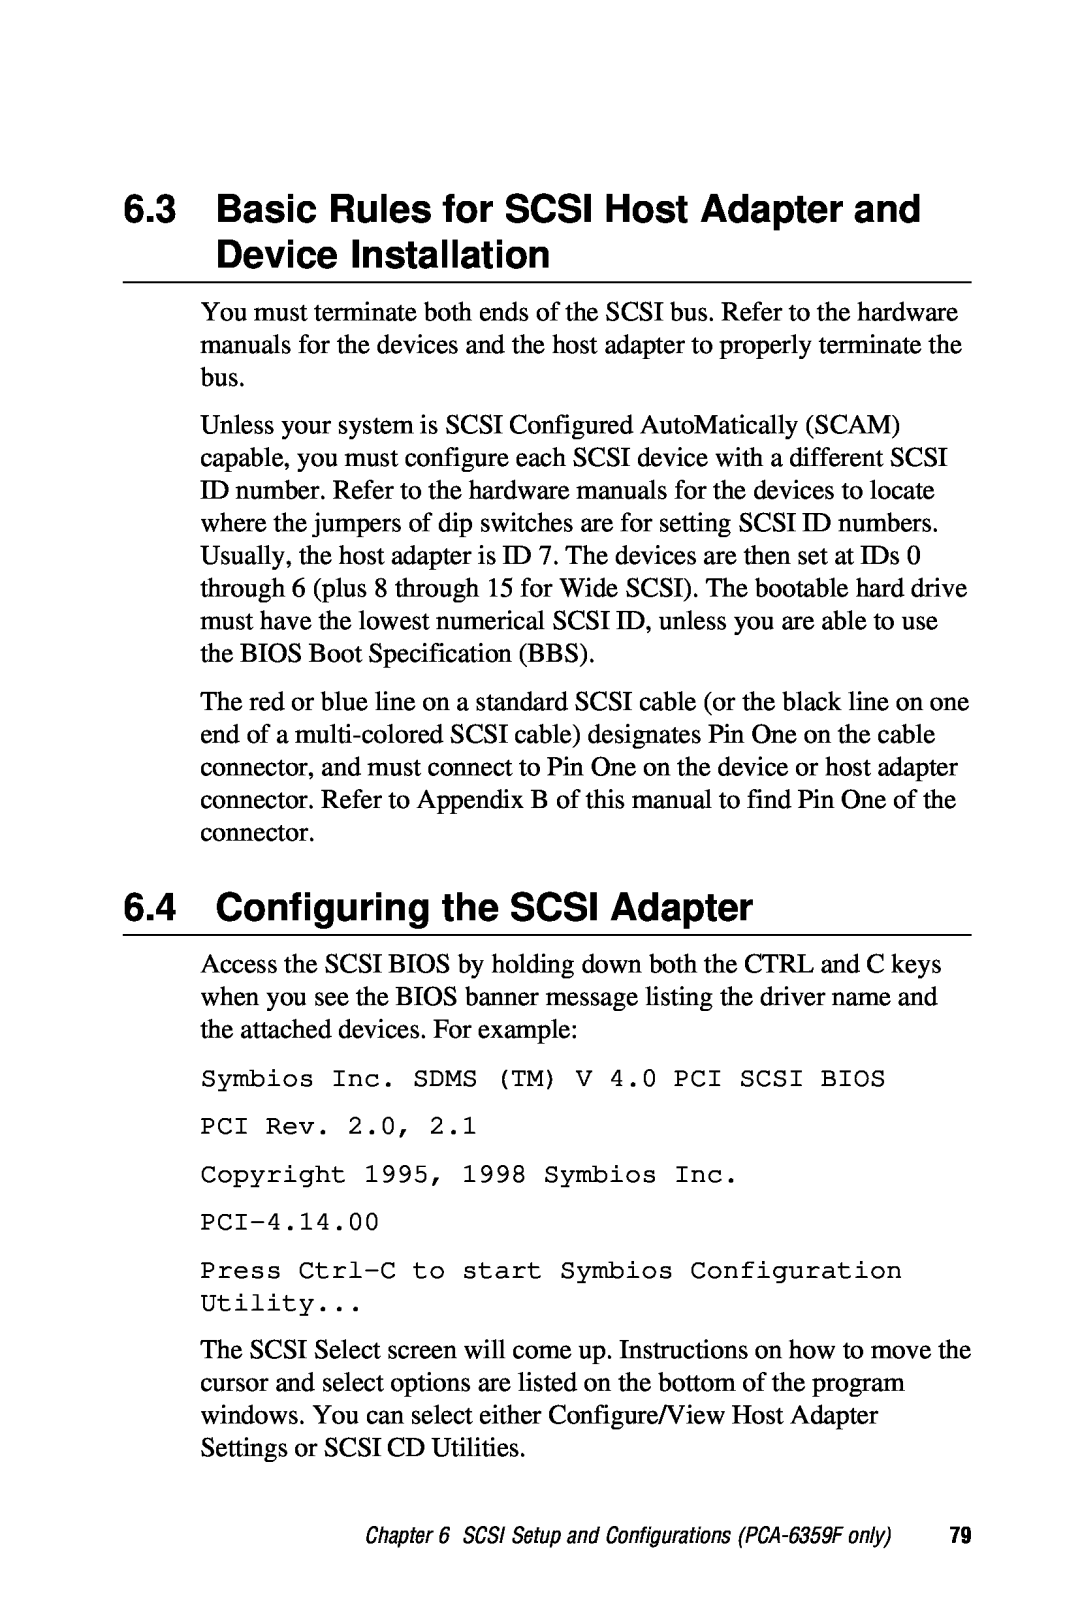 Advantech PCA-6359 user manual Basic Rules for SCSI Host Adapter and Device Installation, Configuring the SCSI Adapter 